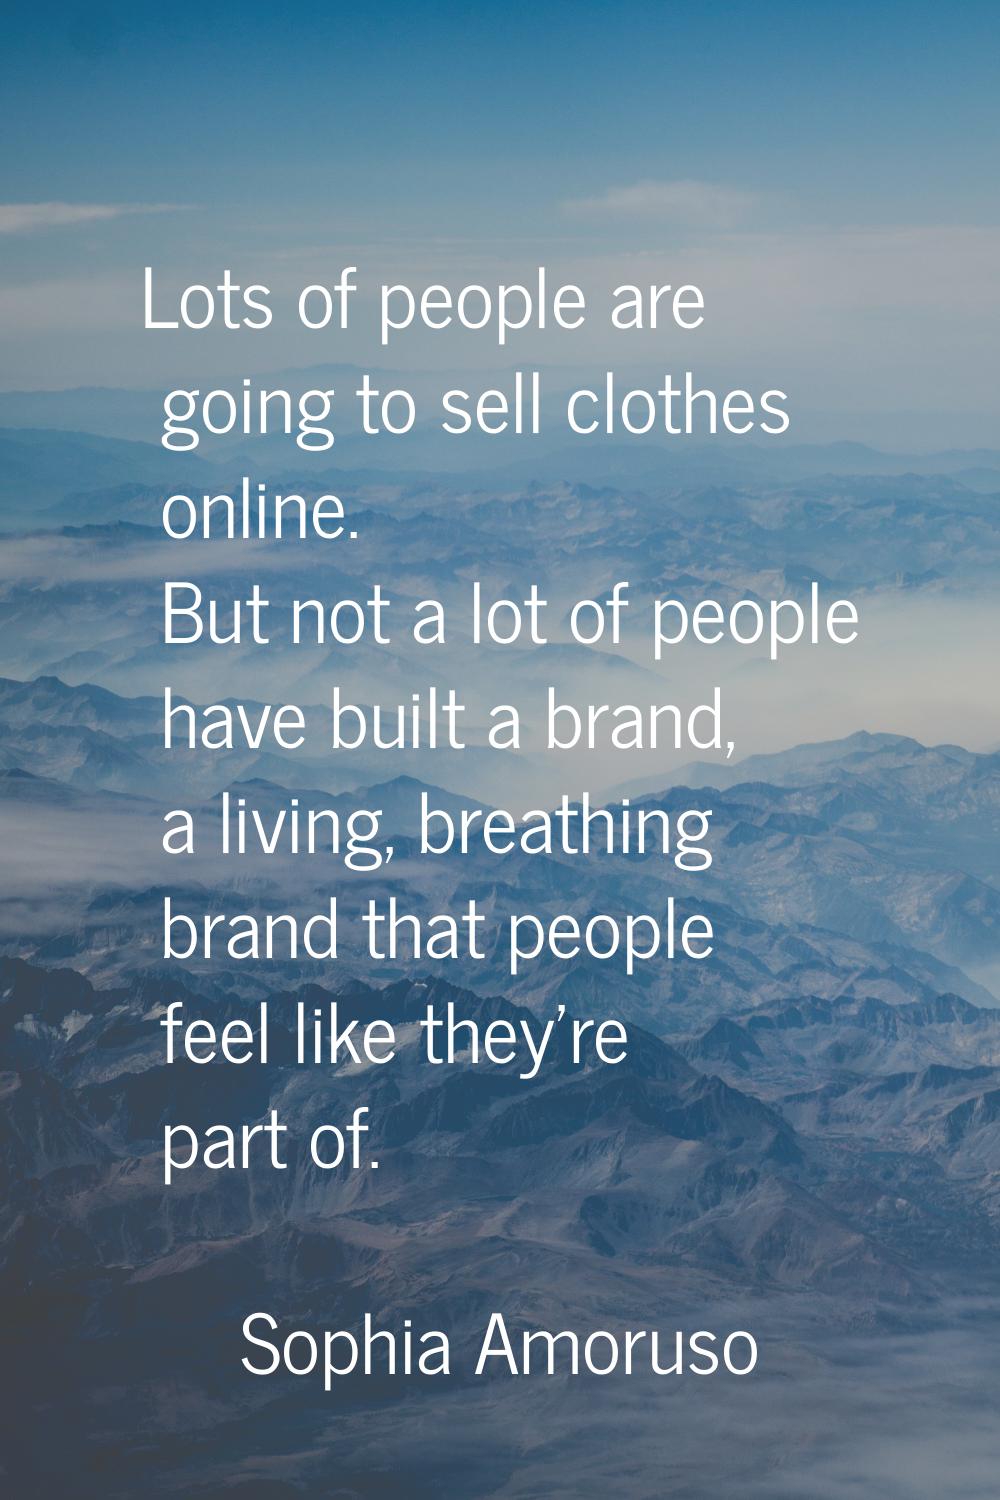 Lots of people are going to sell clothes online. But not a lot of people have built a brand, a livi